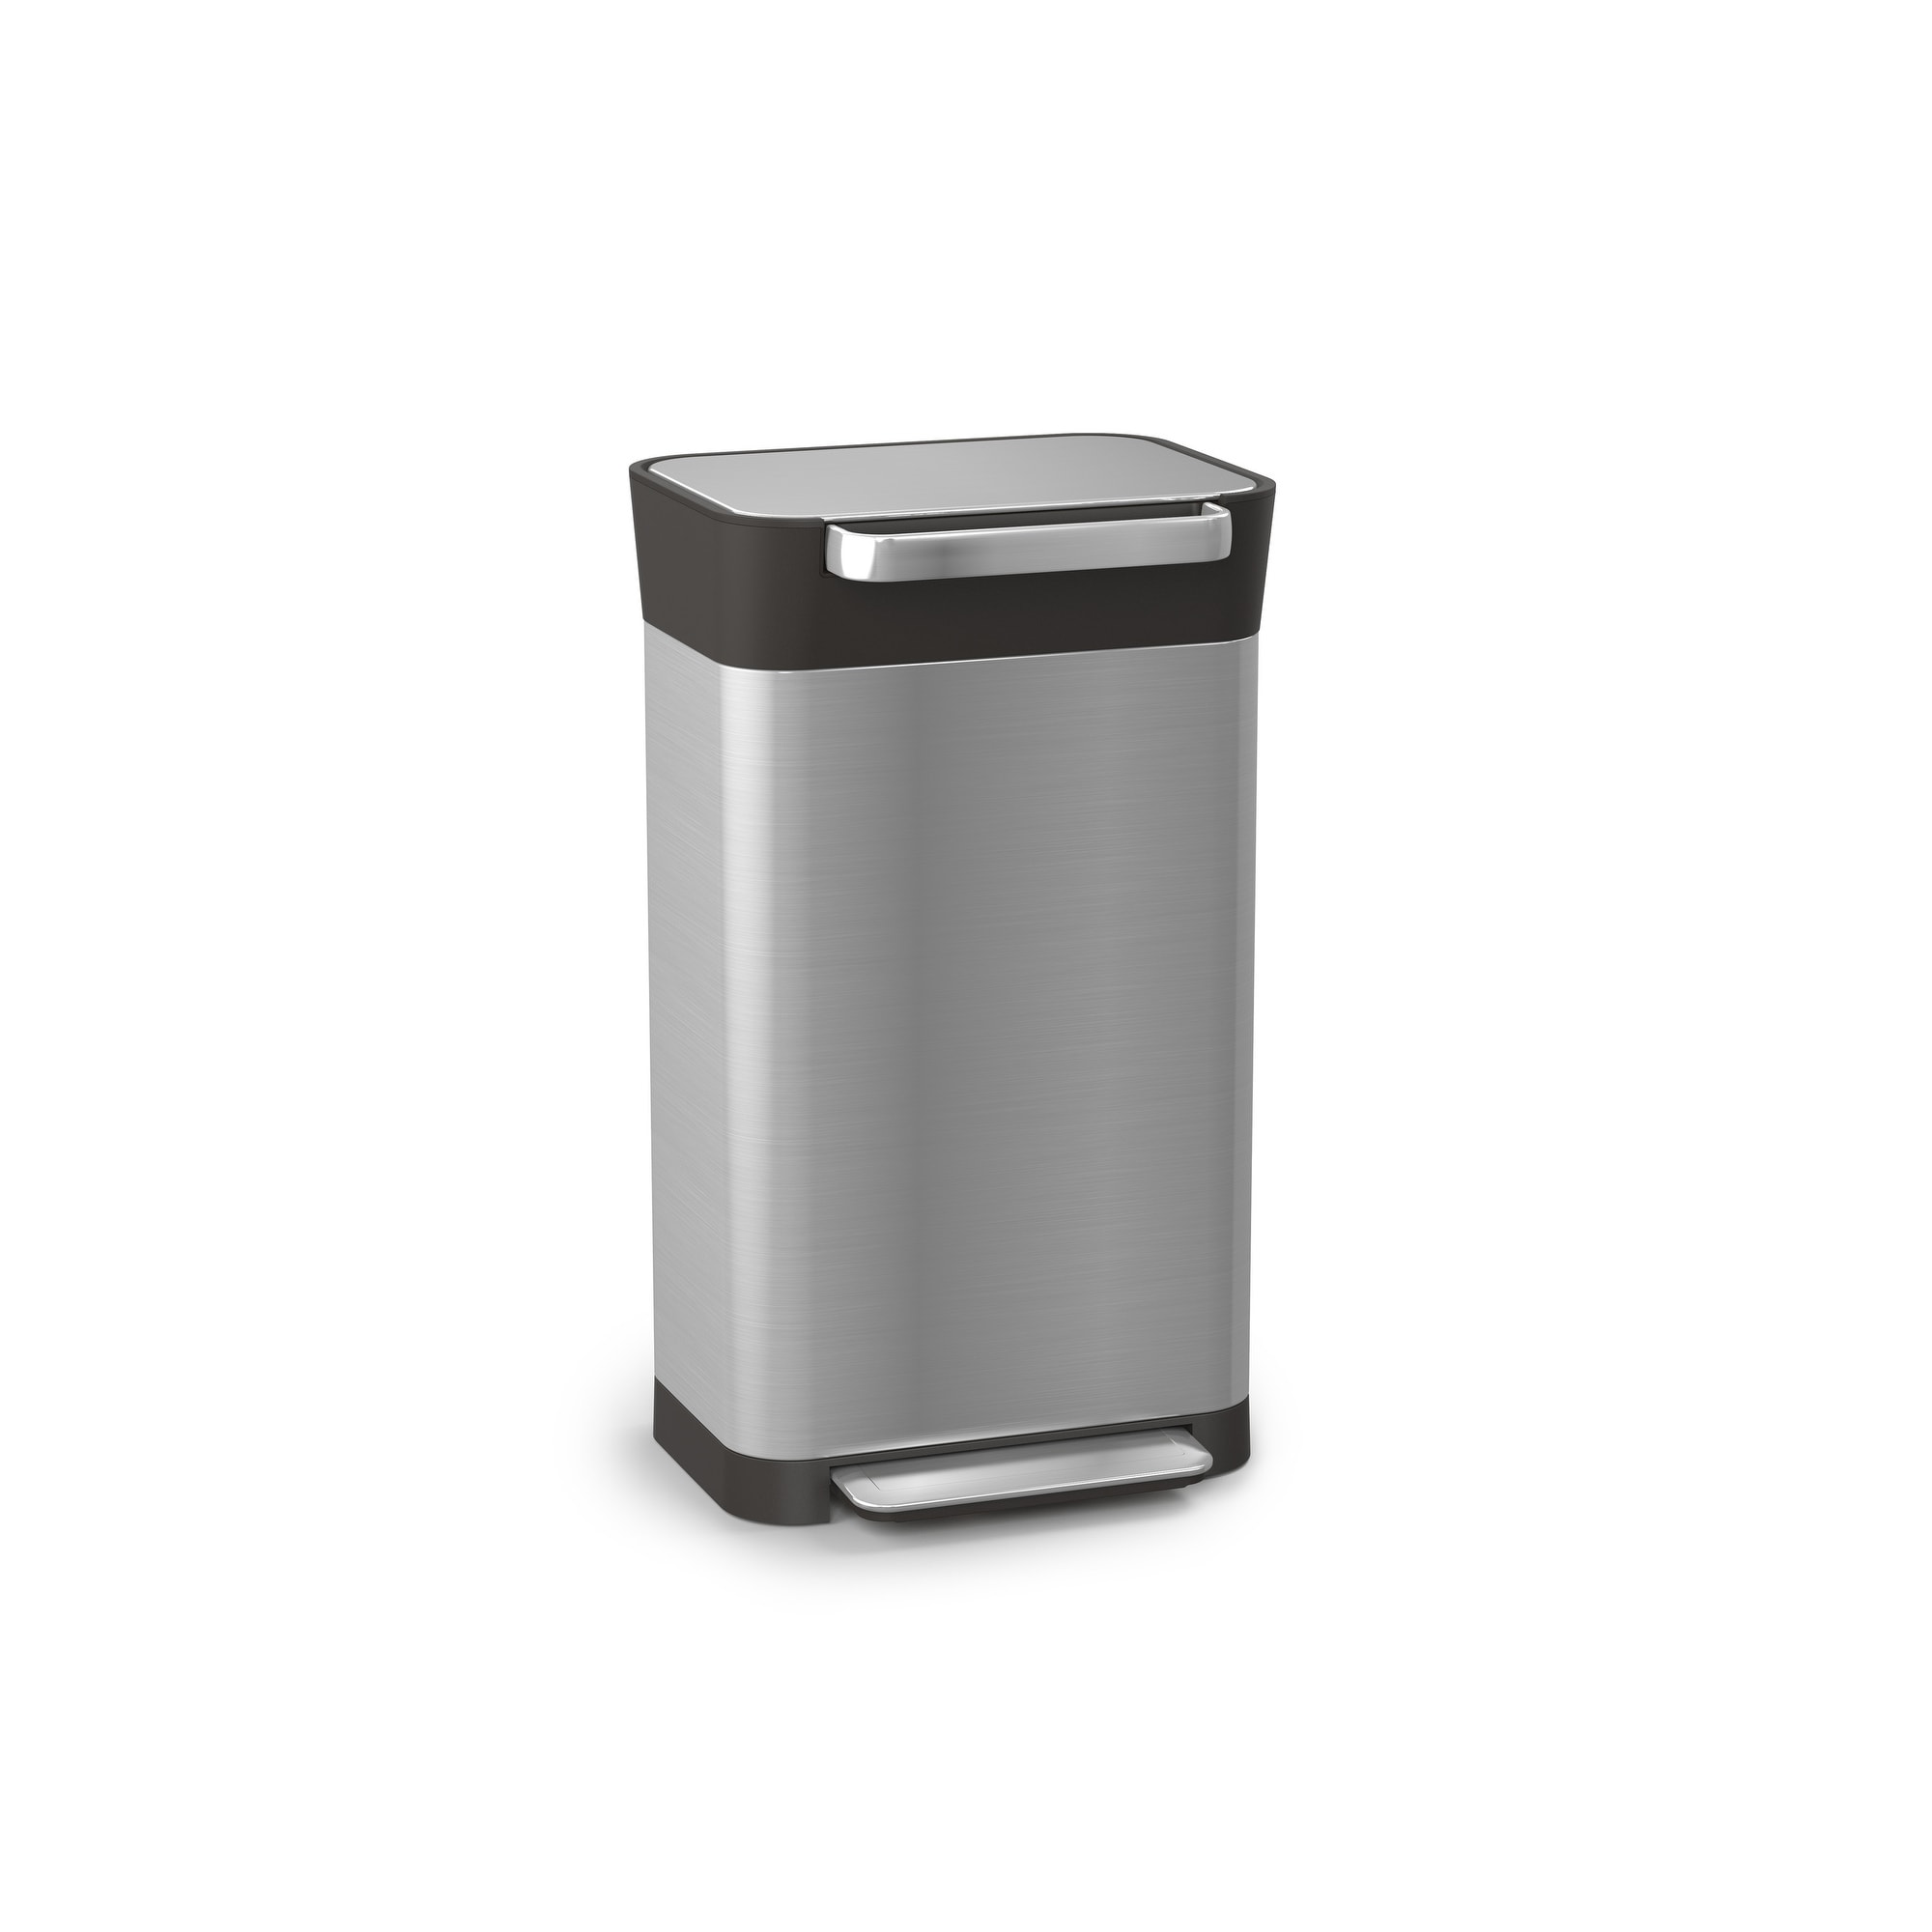 https://ak1.ostkcdn.com/images/products/is/images/direct/d489a79e24b091061a58481a6c265796ed5bee3b/Titan-Stainless-Steel-Step-Trash-Can-Compactor.jpg